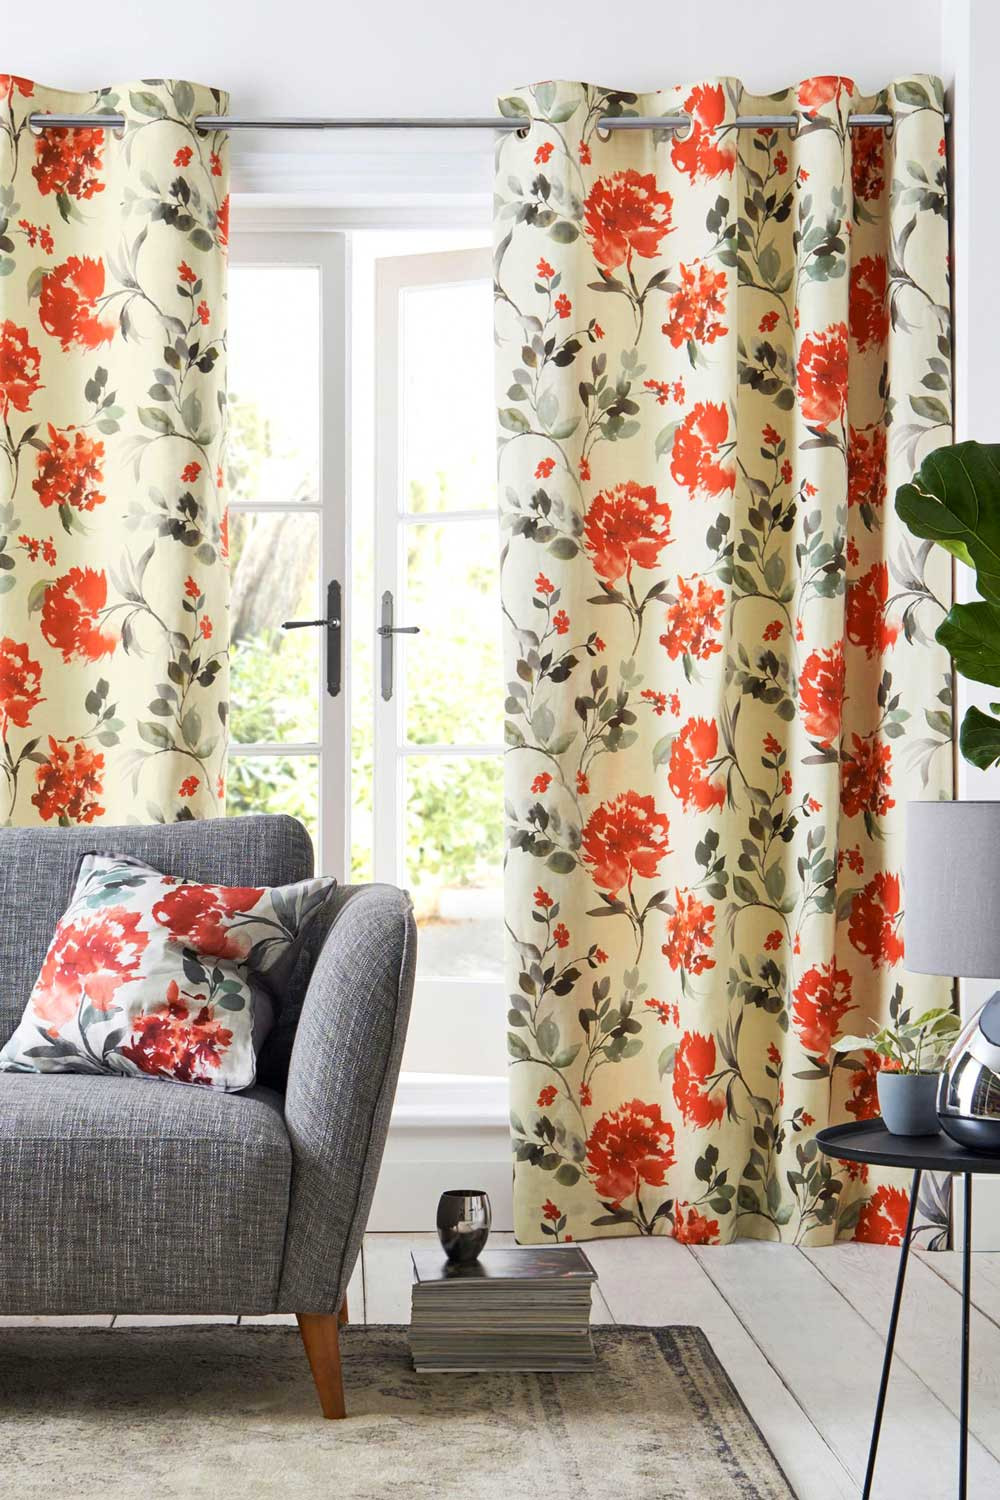 Living Room Curtain
 30 Beautiful Living Room Curtain Ideas and Patterns